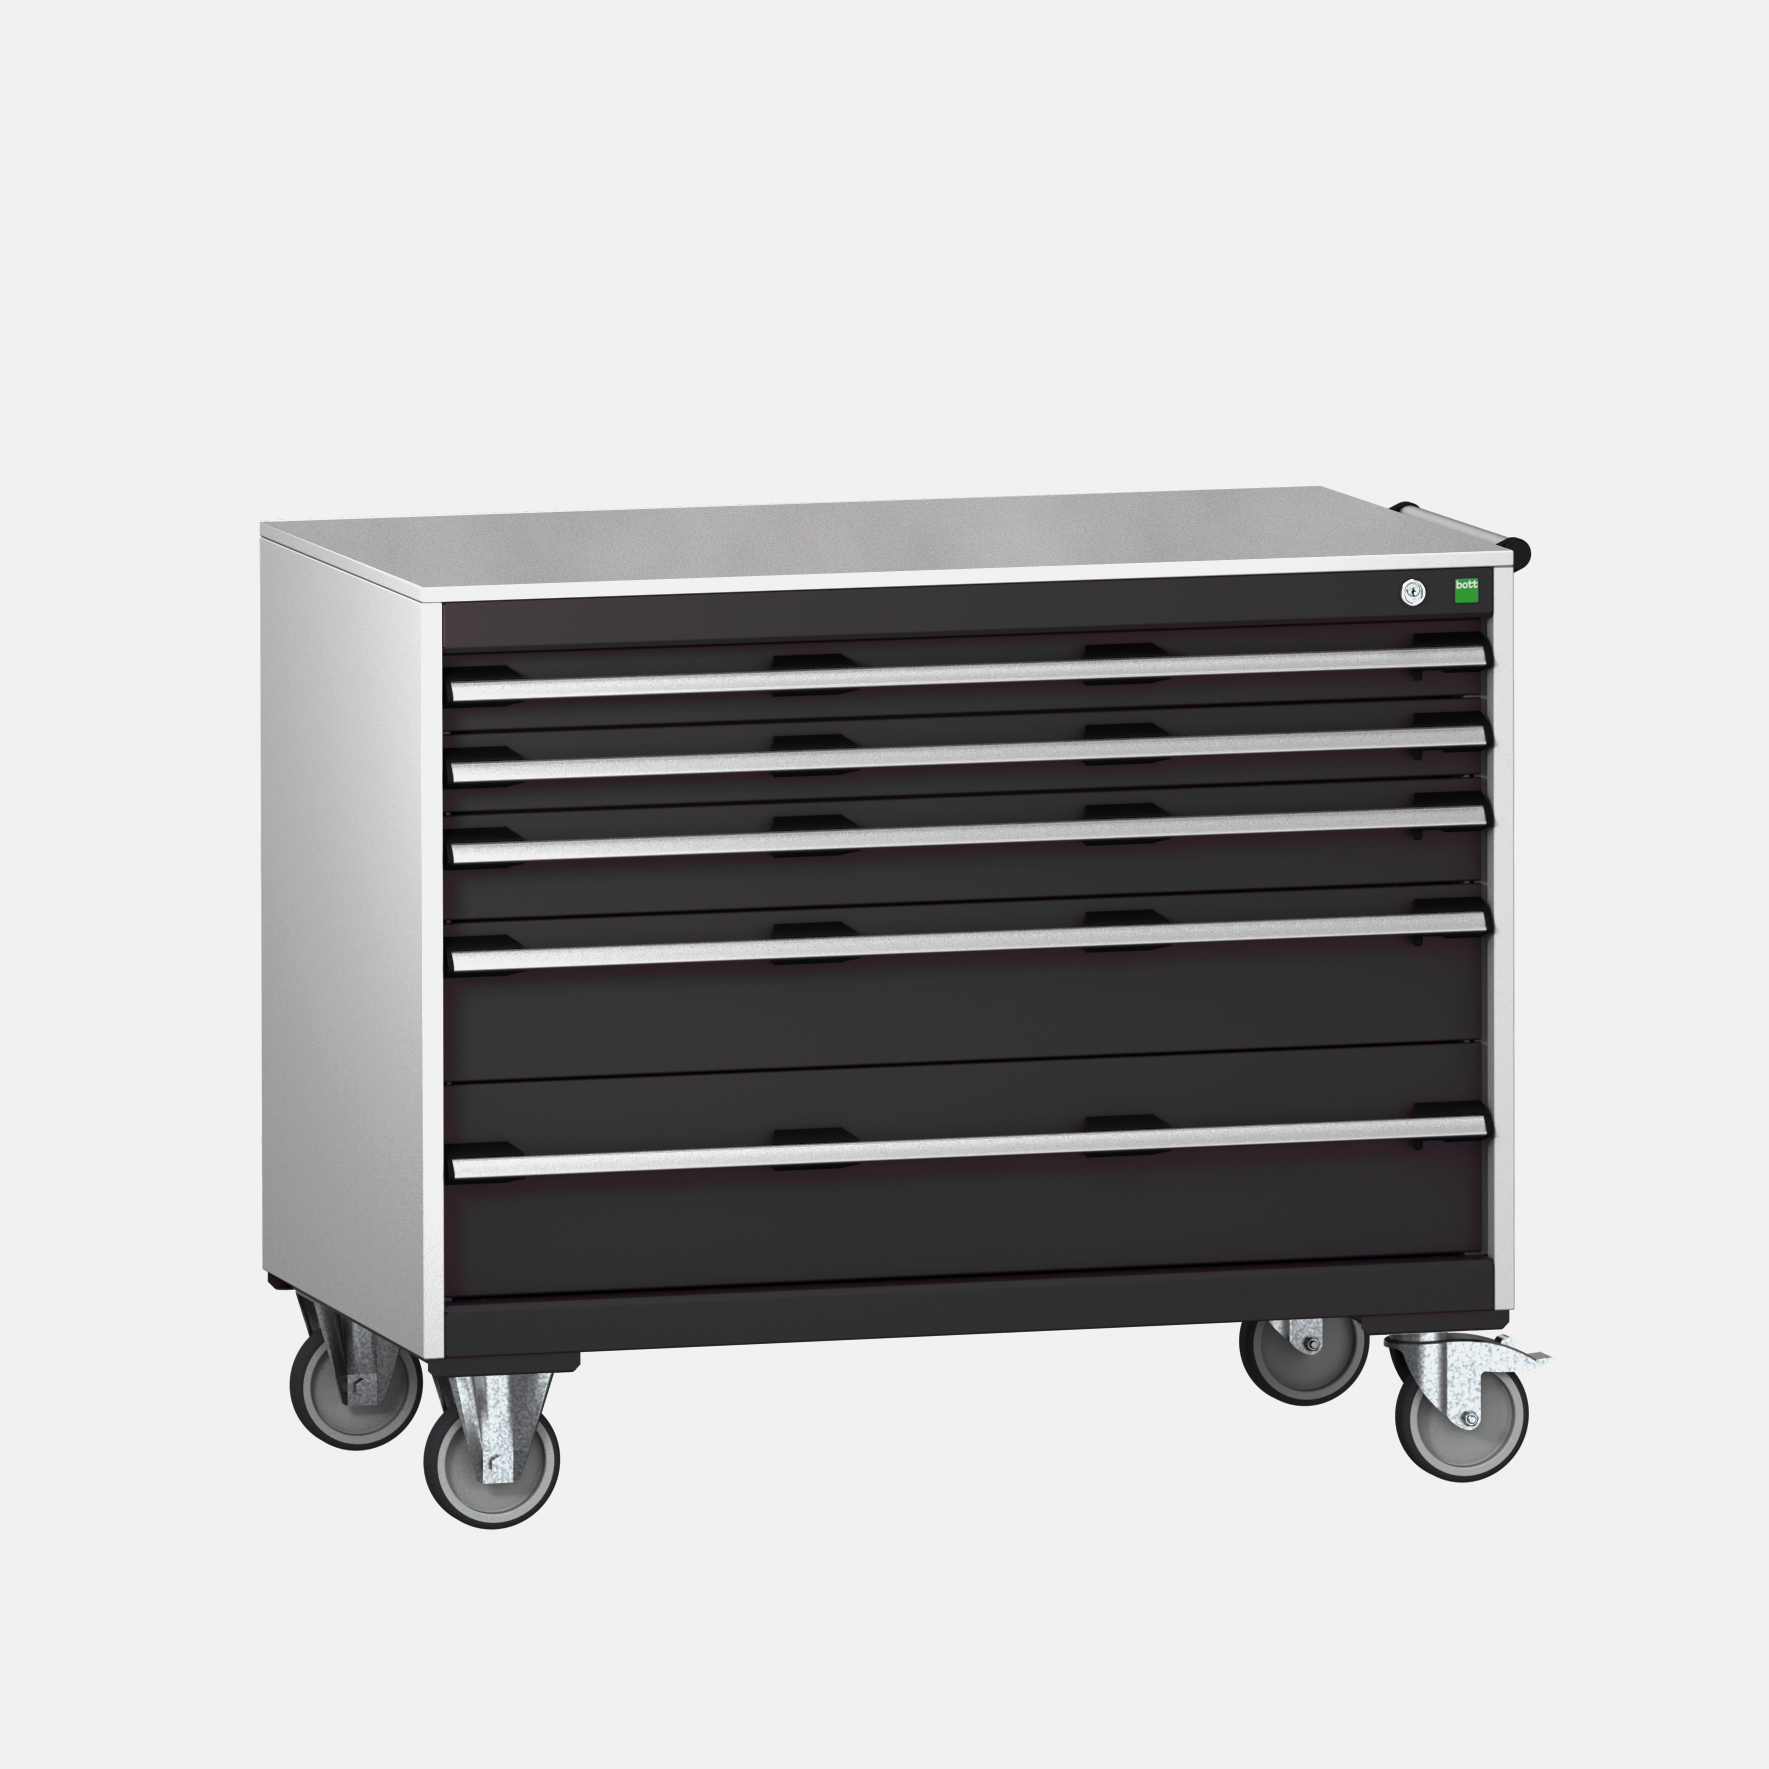 Bott Cubio Mobile Drawer Cabinet With 5 Drawers & Lino Worktop - 40402164.19V